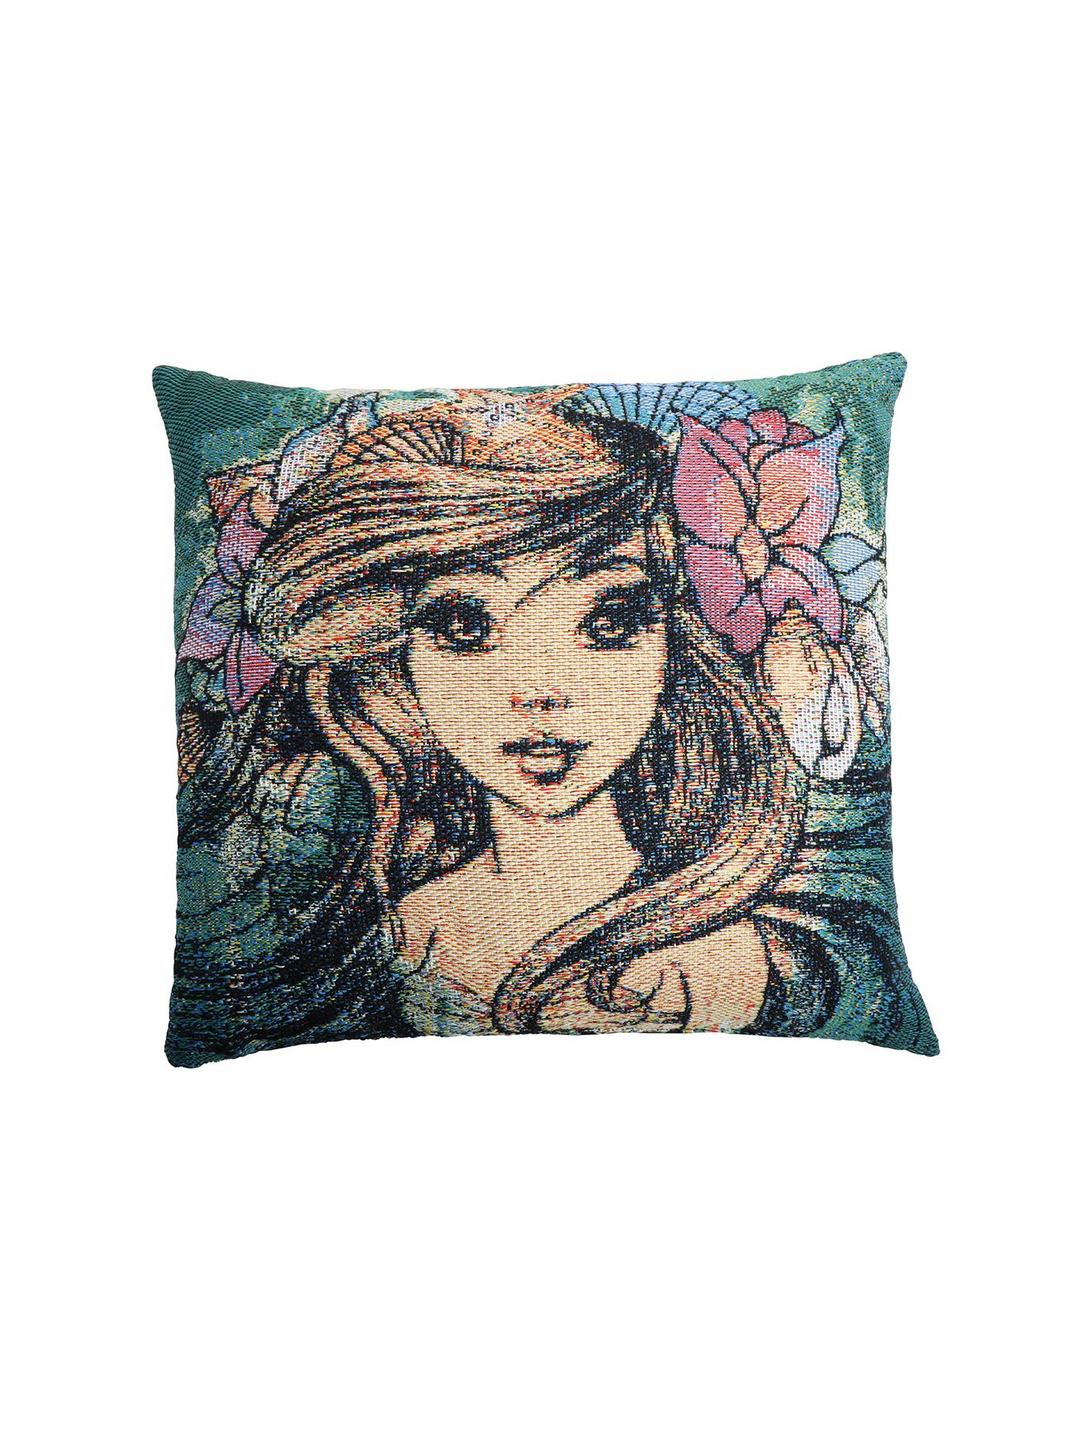 Disney The Little Mermaid Ariel Woven Tapestry Throw Pillow, , hi-res